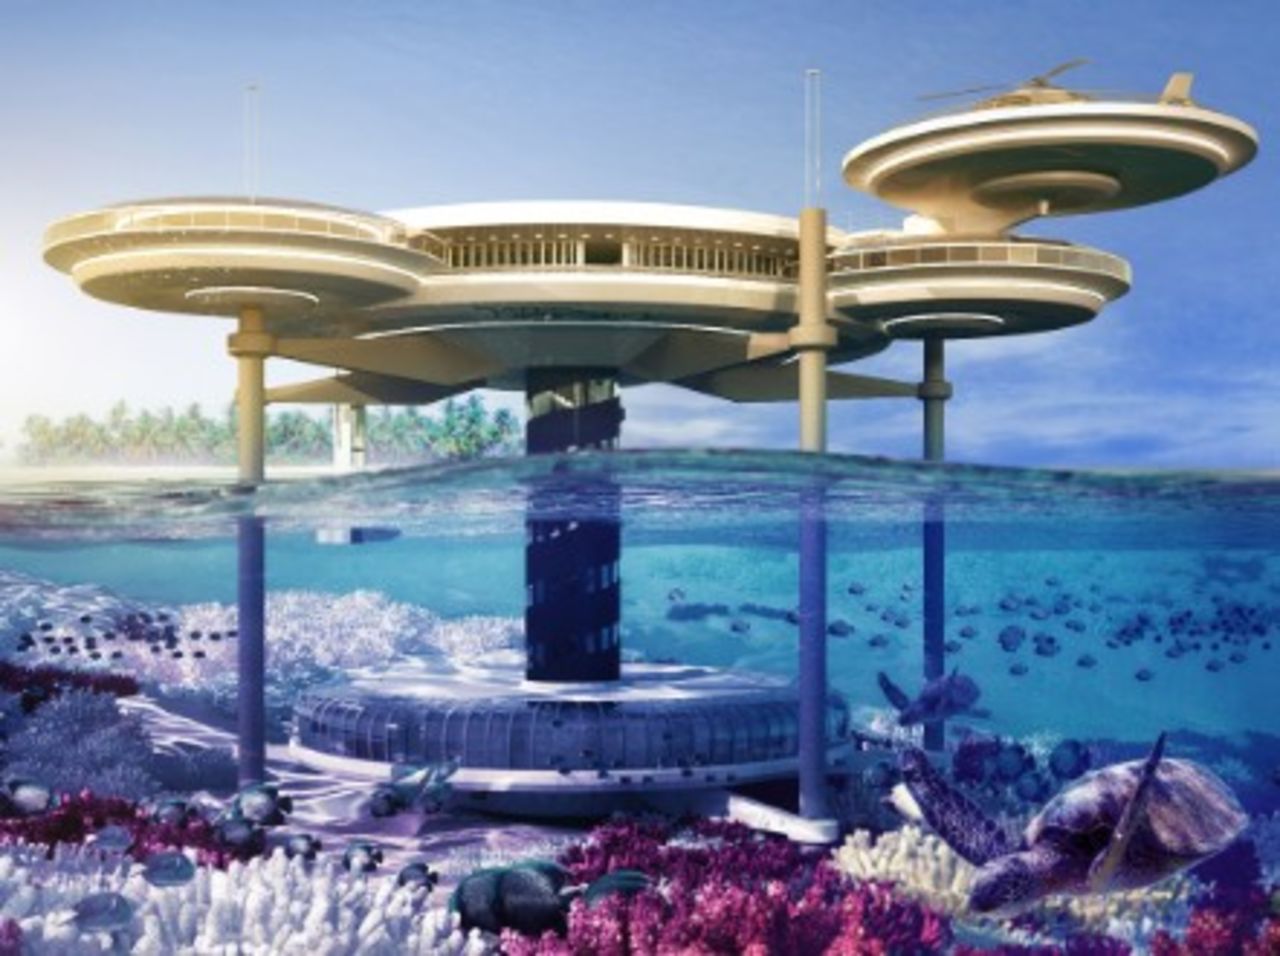 The Water Discus Hotel, to be built in the Maldives. - (Deep Ocean Technology)